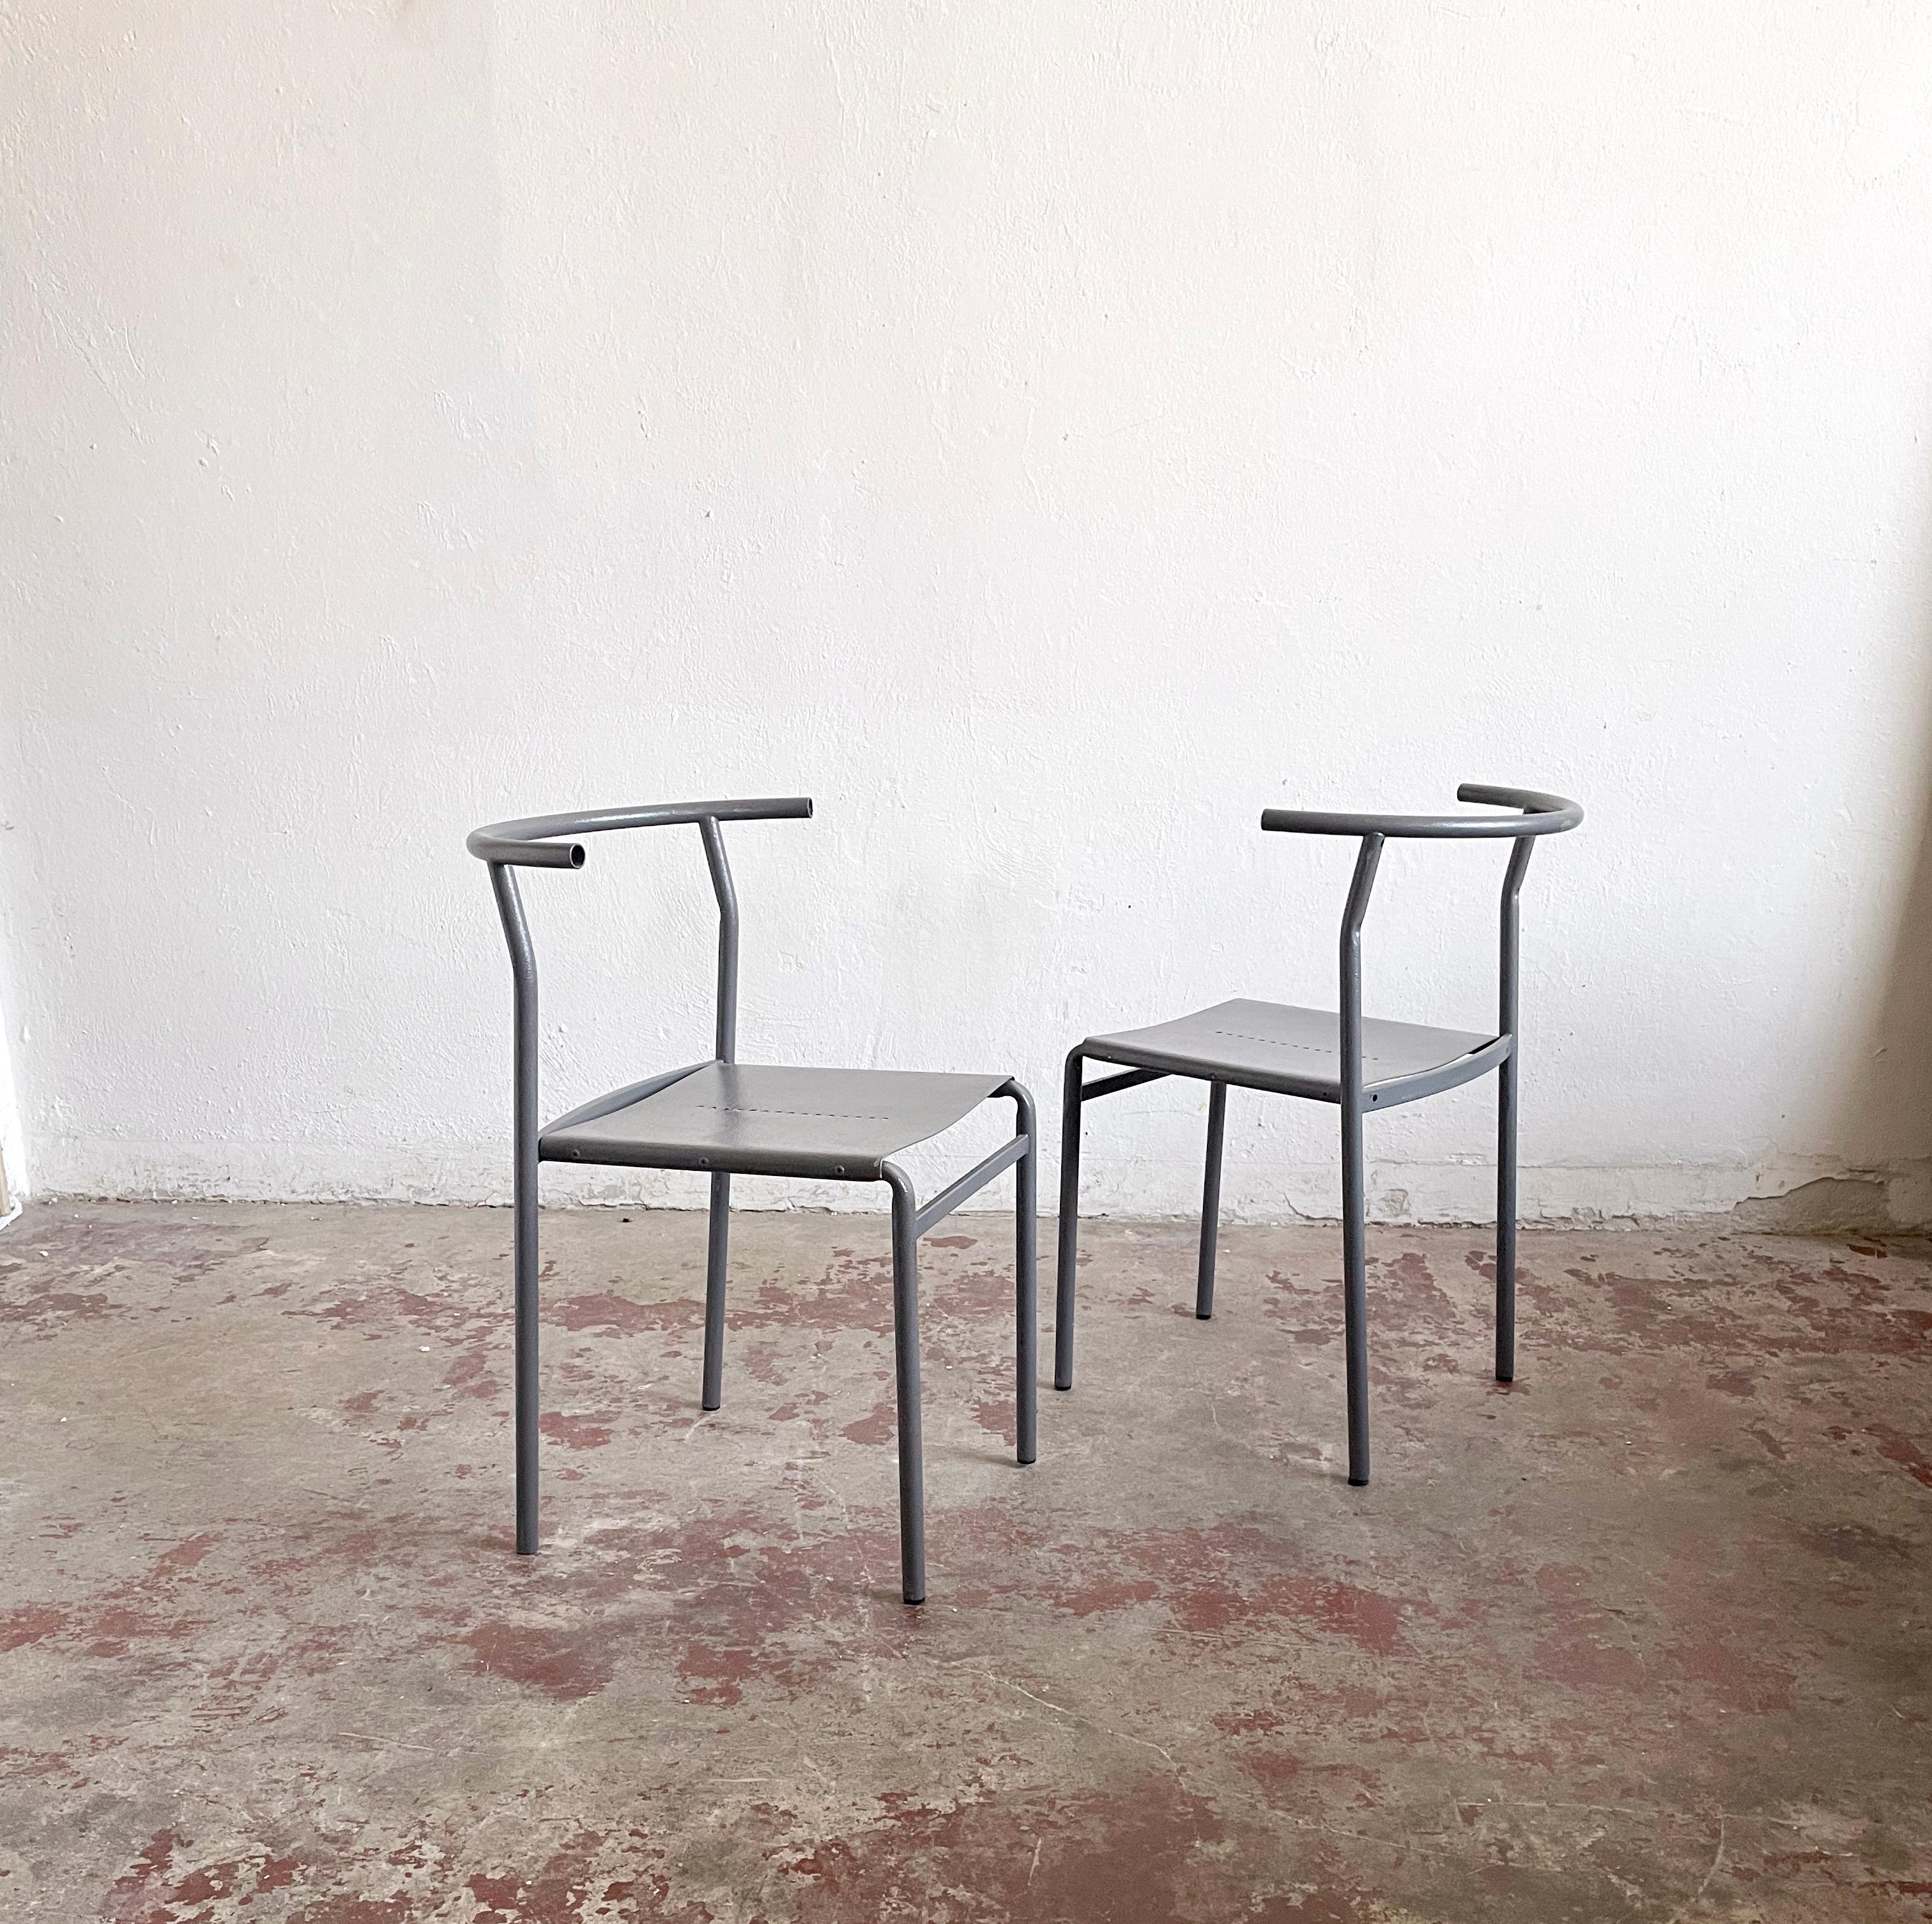 Minimalist post-modern sculptural cafè chair manufactured in Italy in the 1980s

Design attributed to French designer Philippe Starck (Chair designed for Cafè Costes Paris and manufactured by Italian company Baleri in the 1980s and the